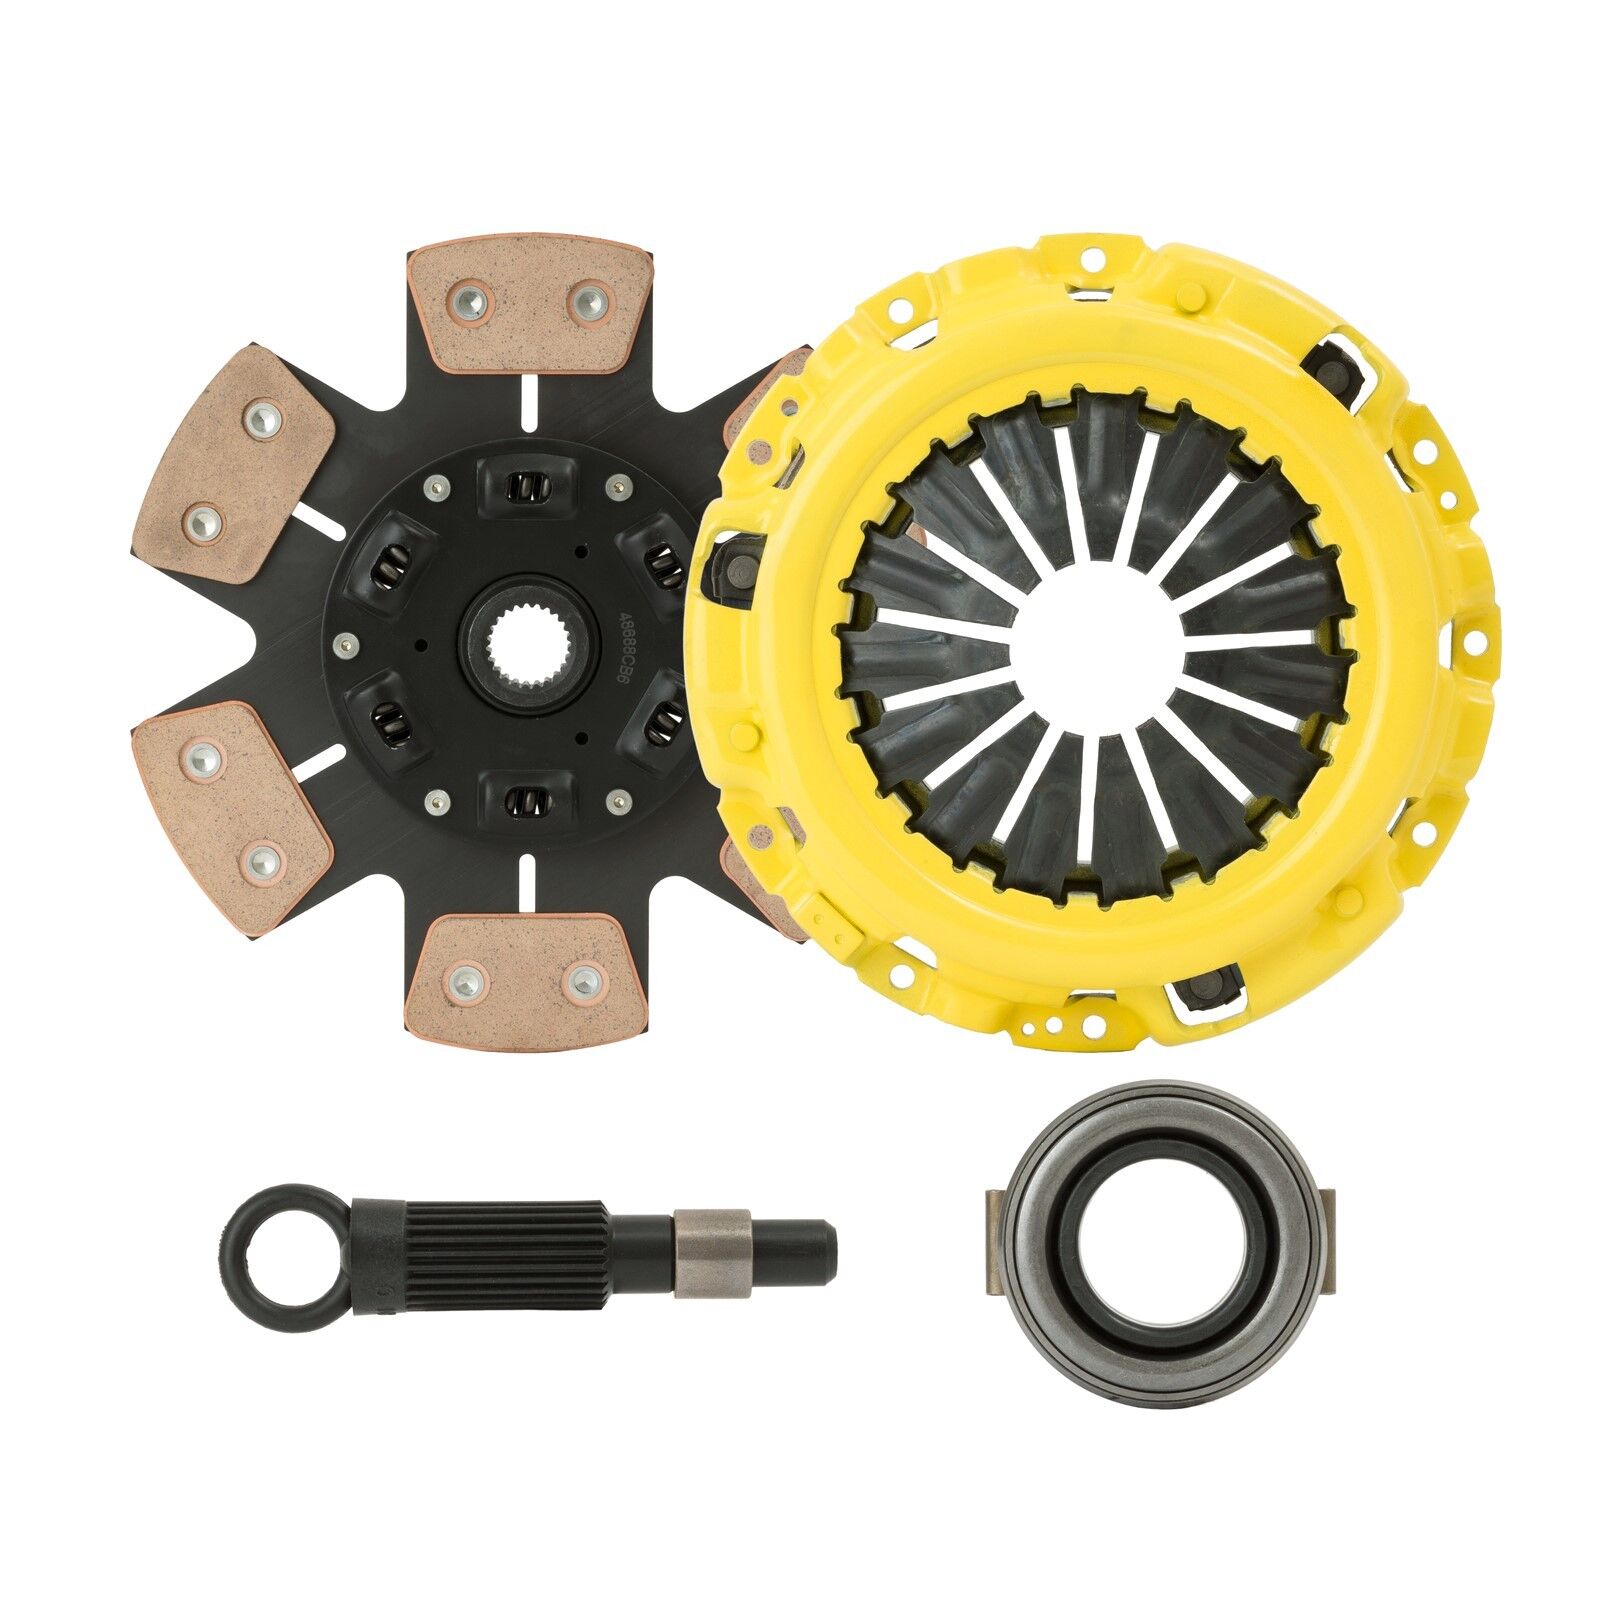 JDM STAGE 3 RACING CLUTCH KIT fits COROLLA PASEO TERCEL 5EFE & 4AFE by CXP